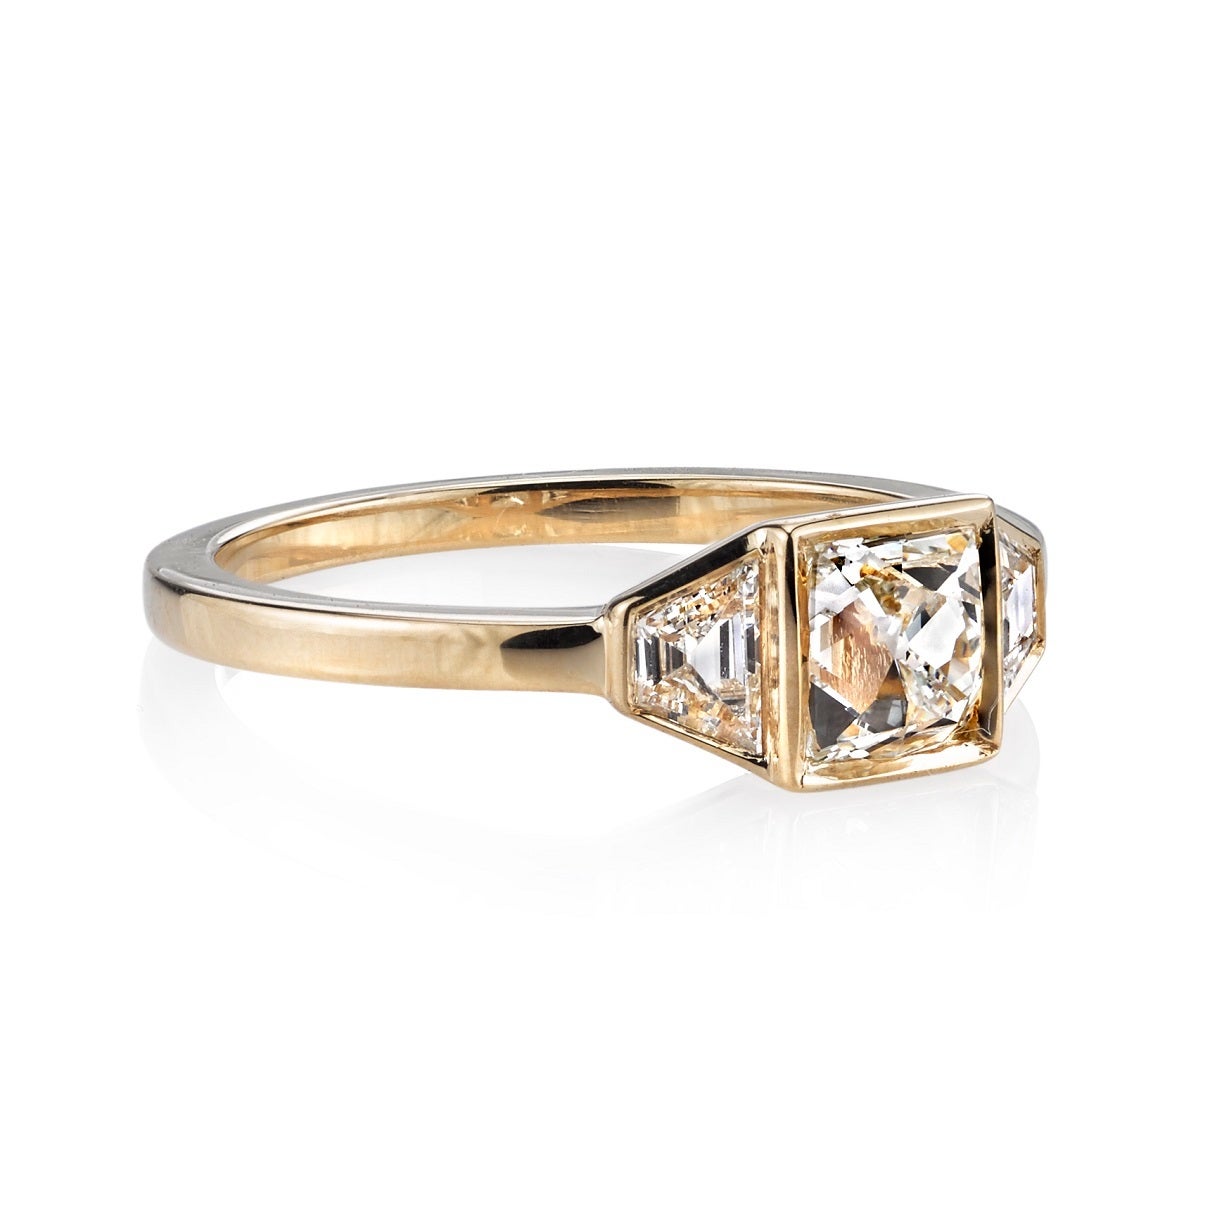 0.76ct I/VS vintage Cushion cut diamond set in a handcrafted 18K yellow gold mounting. A clean and classic design featuring trapezoid accent diamonds.